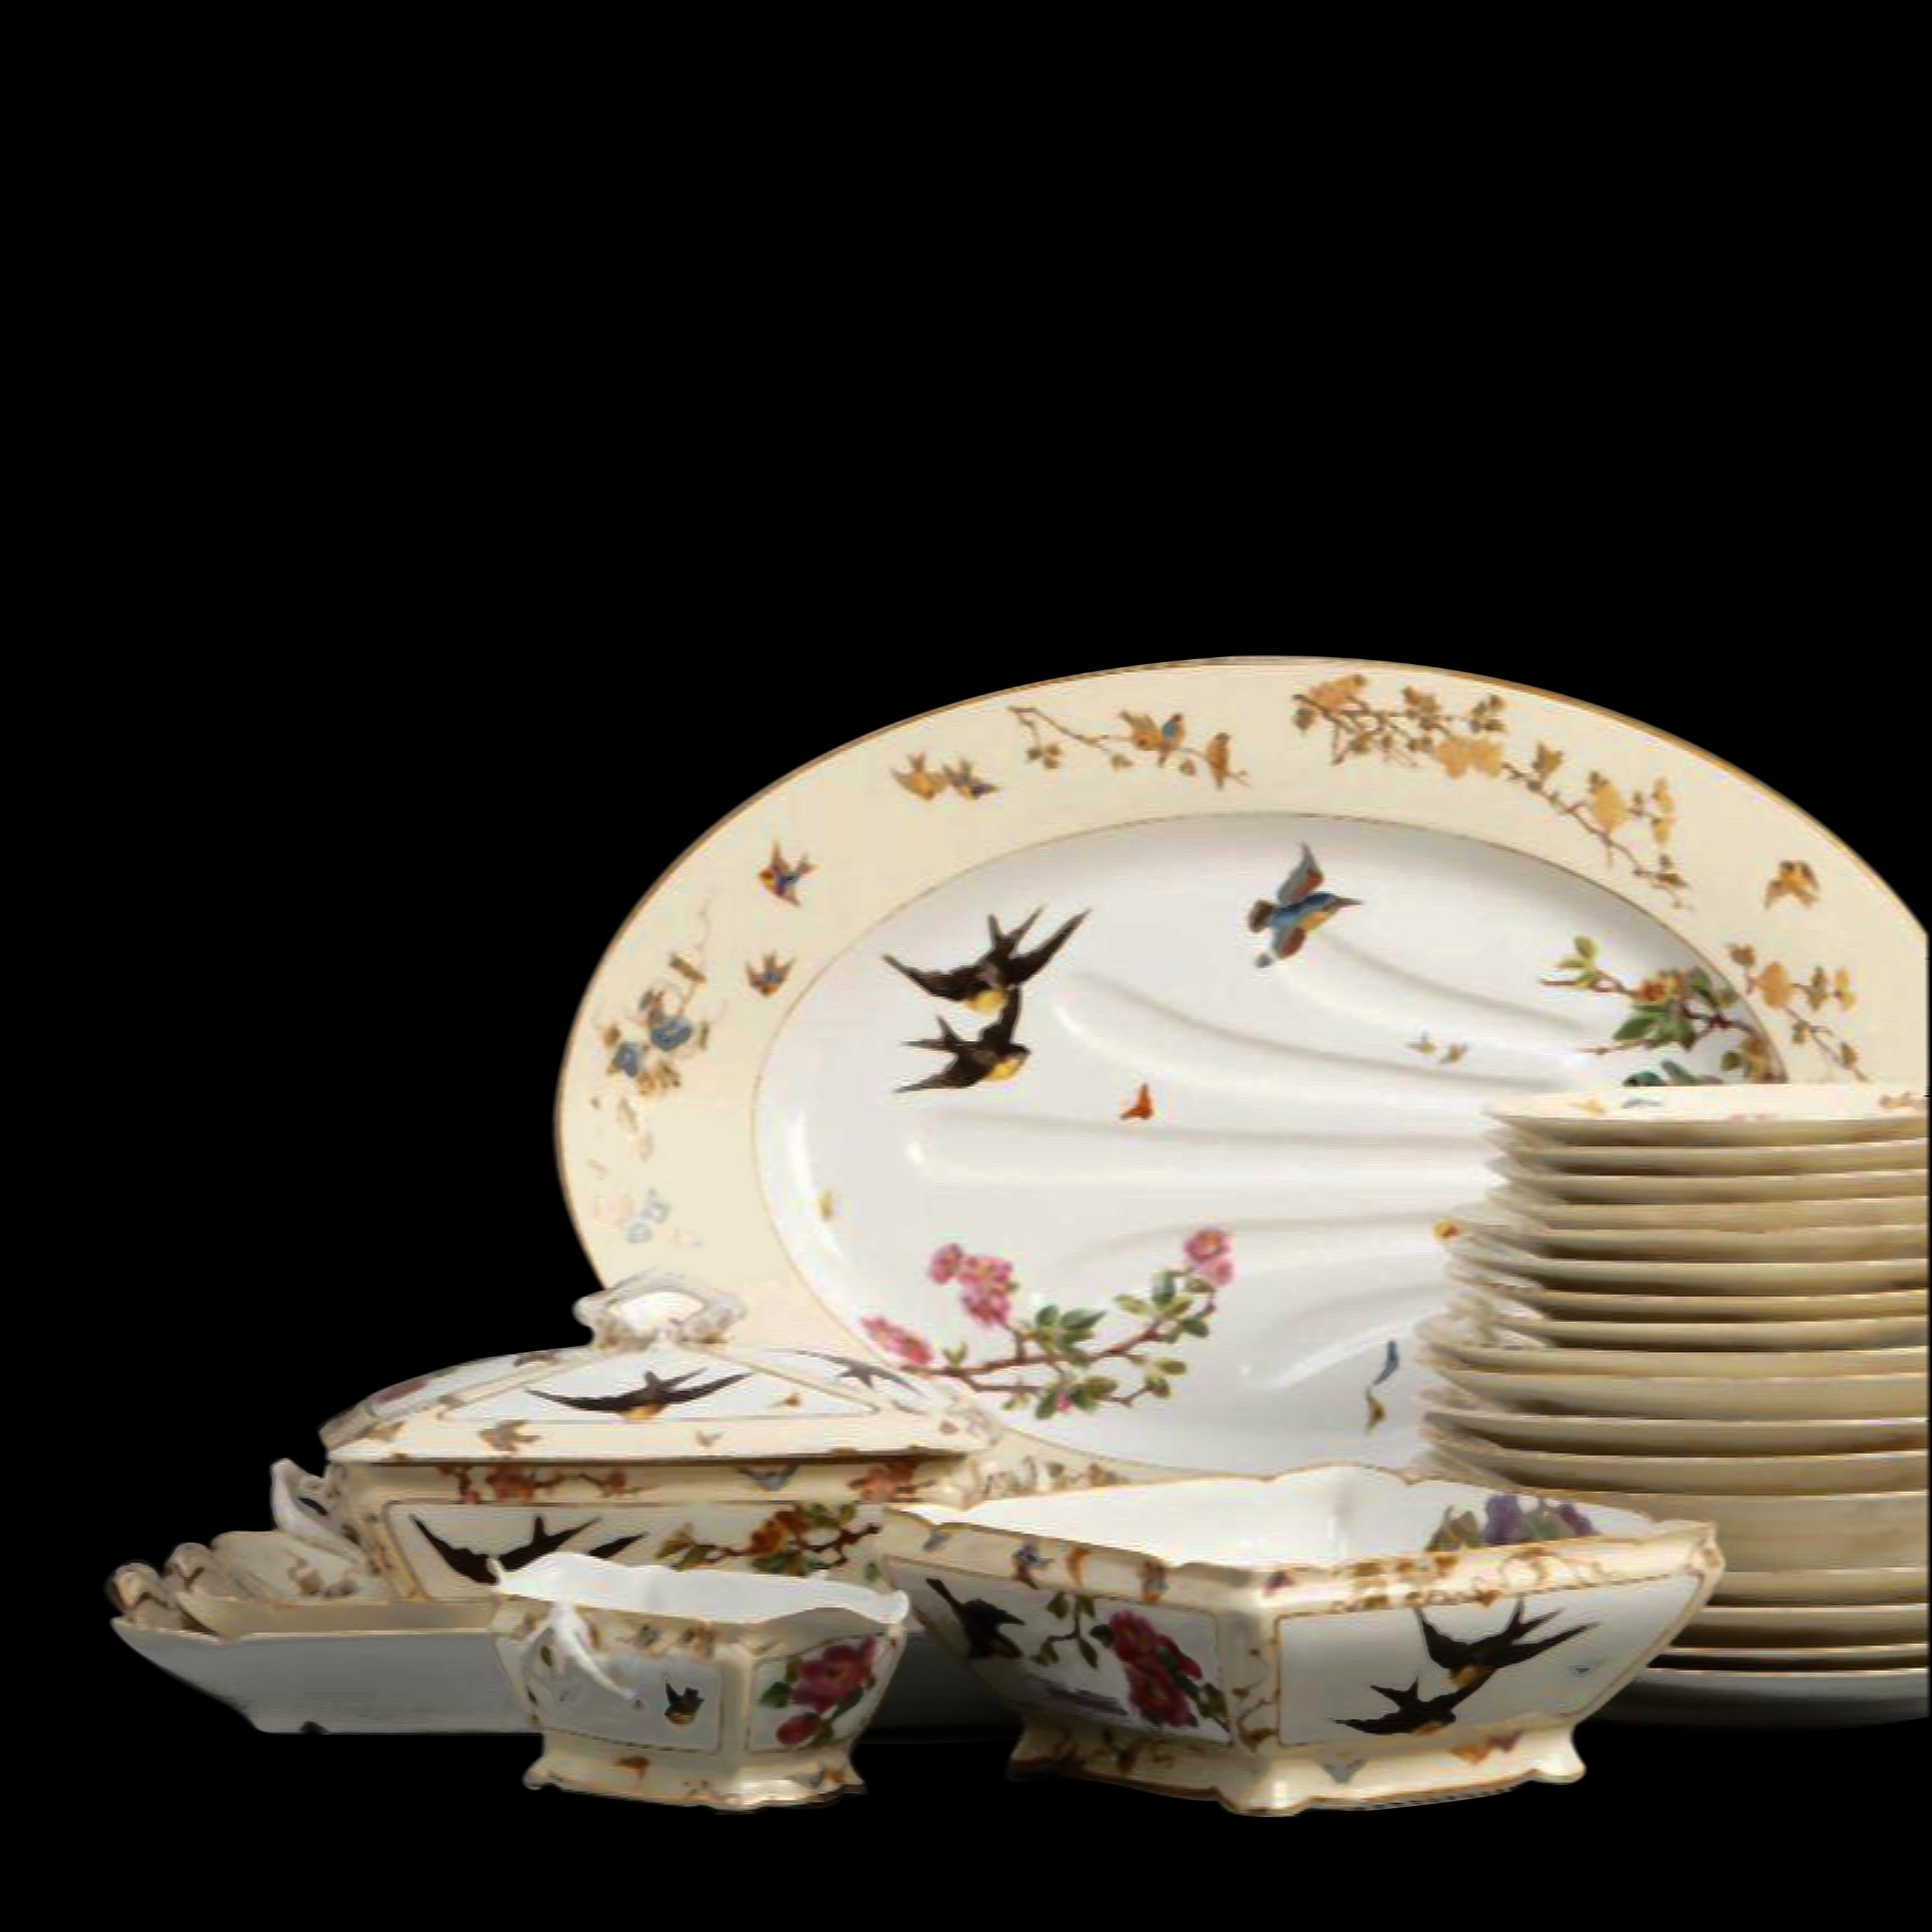 Hand-Painted Aesthetic Movement 19th Dinner Set 57 Pieces Limoges by Charles Field Haviland